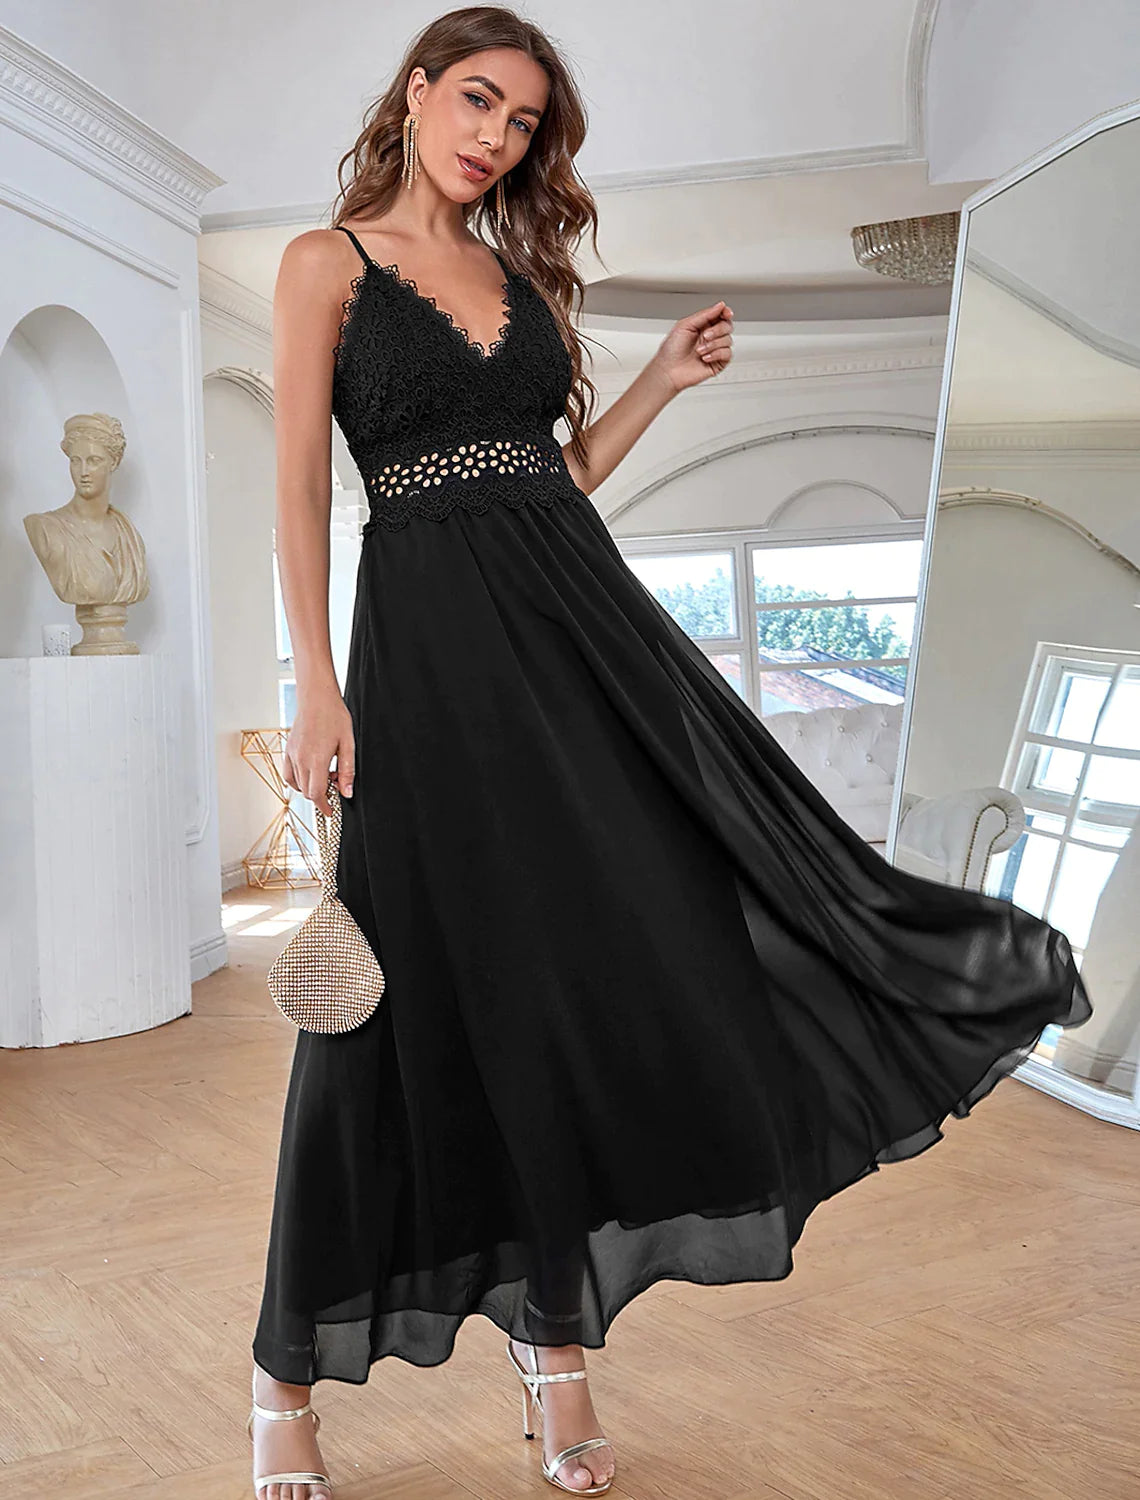 A-Line Elegant Vintage Party Wear Formal Evening Dress V Neck Sleeveless Ankle Length Chiffon with Sequin Splicing